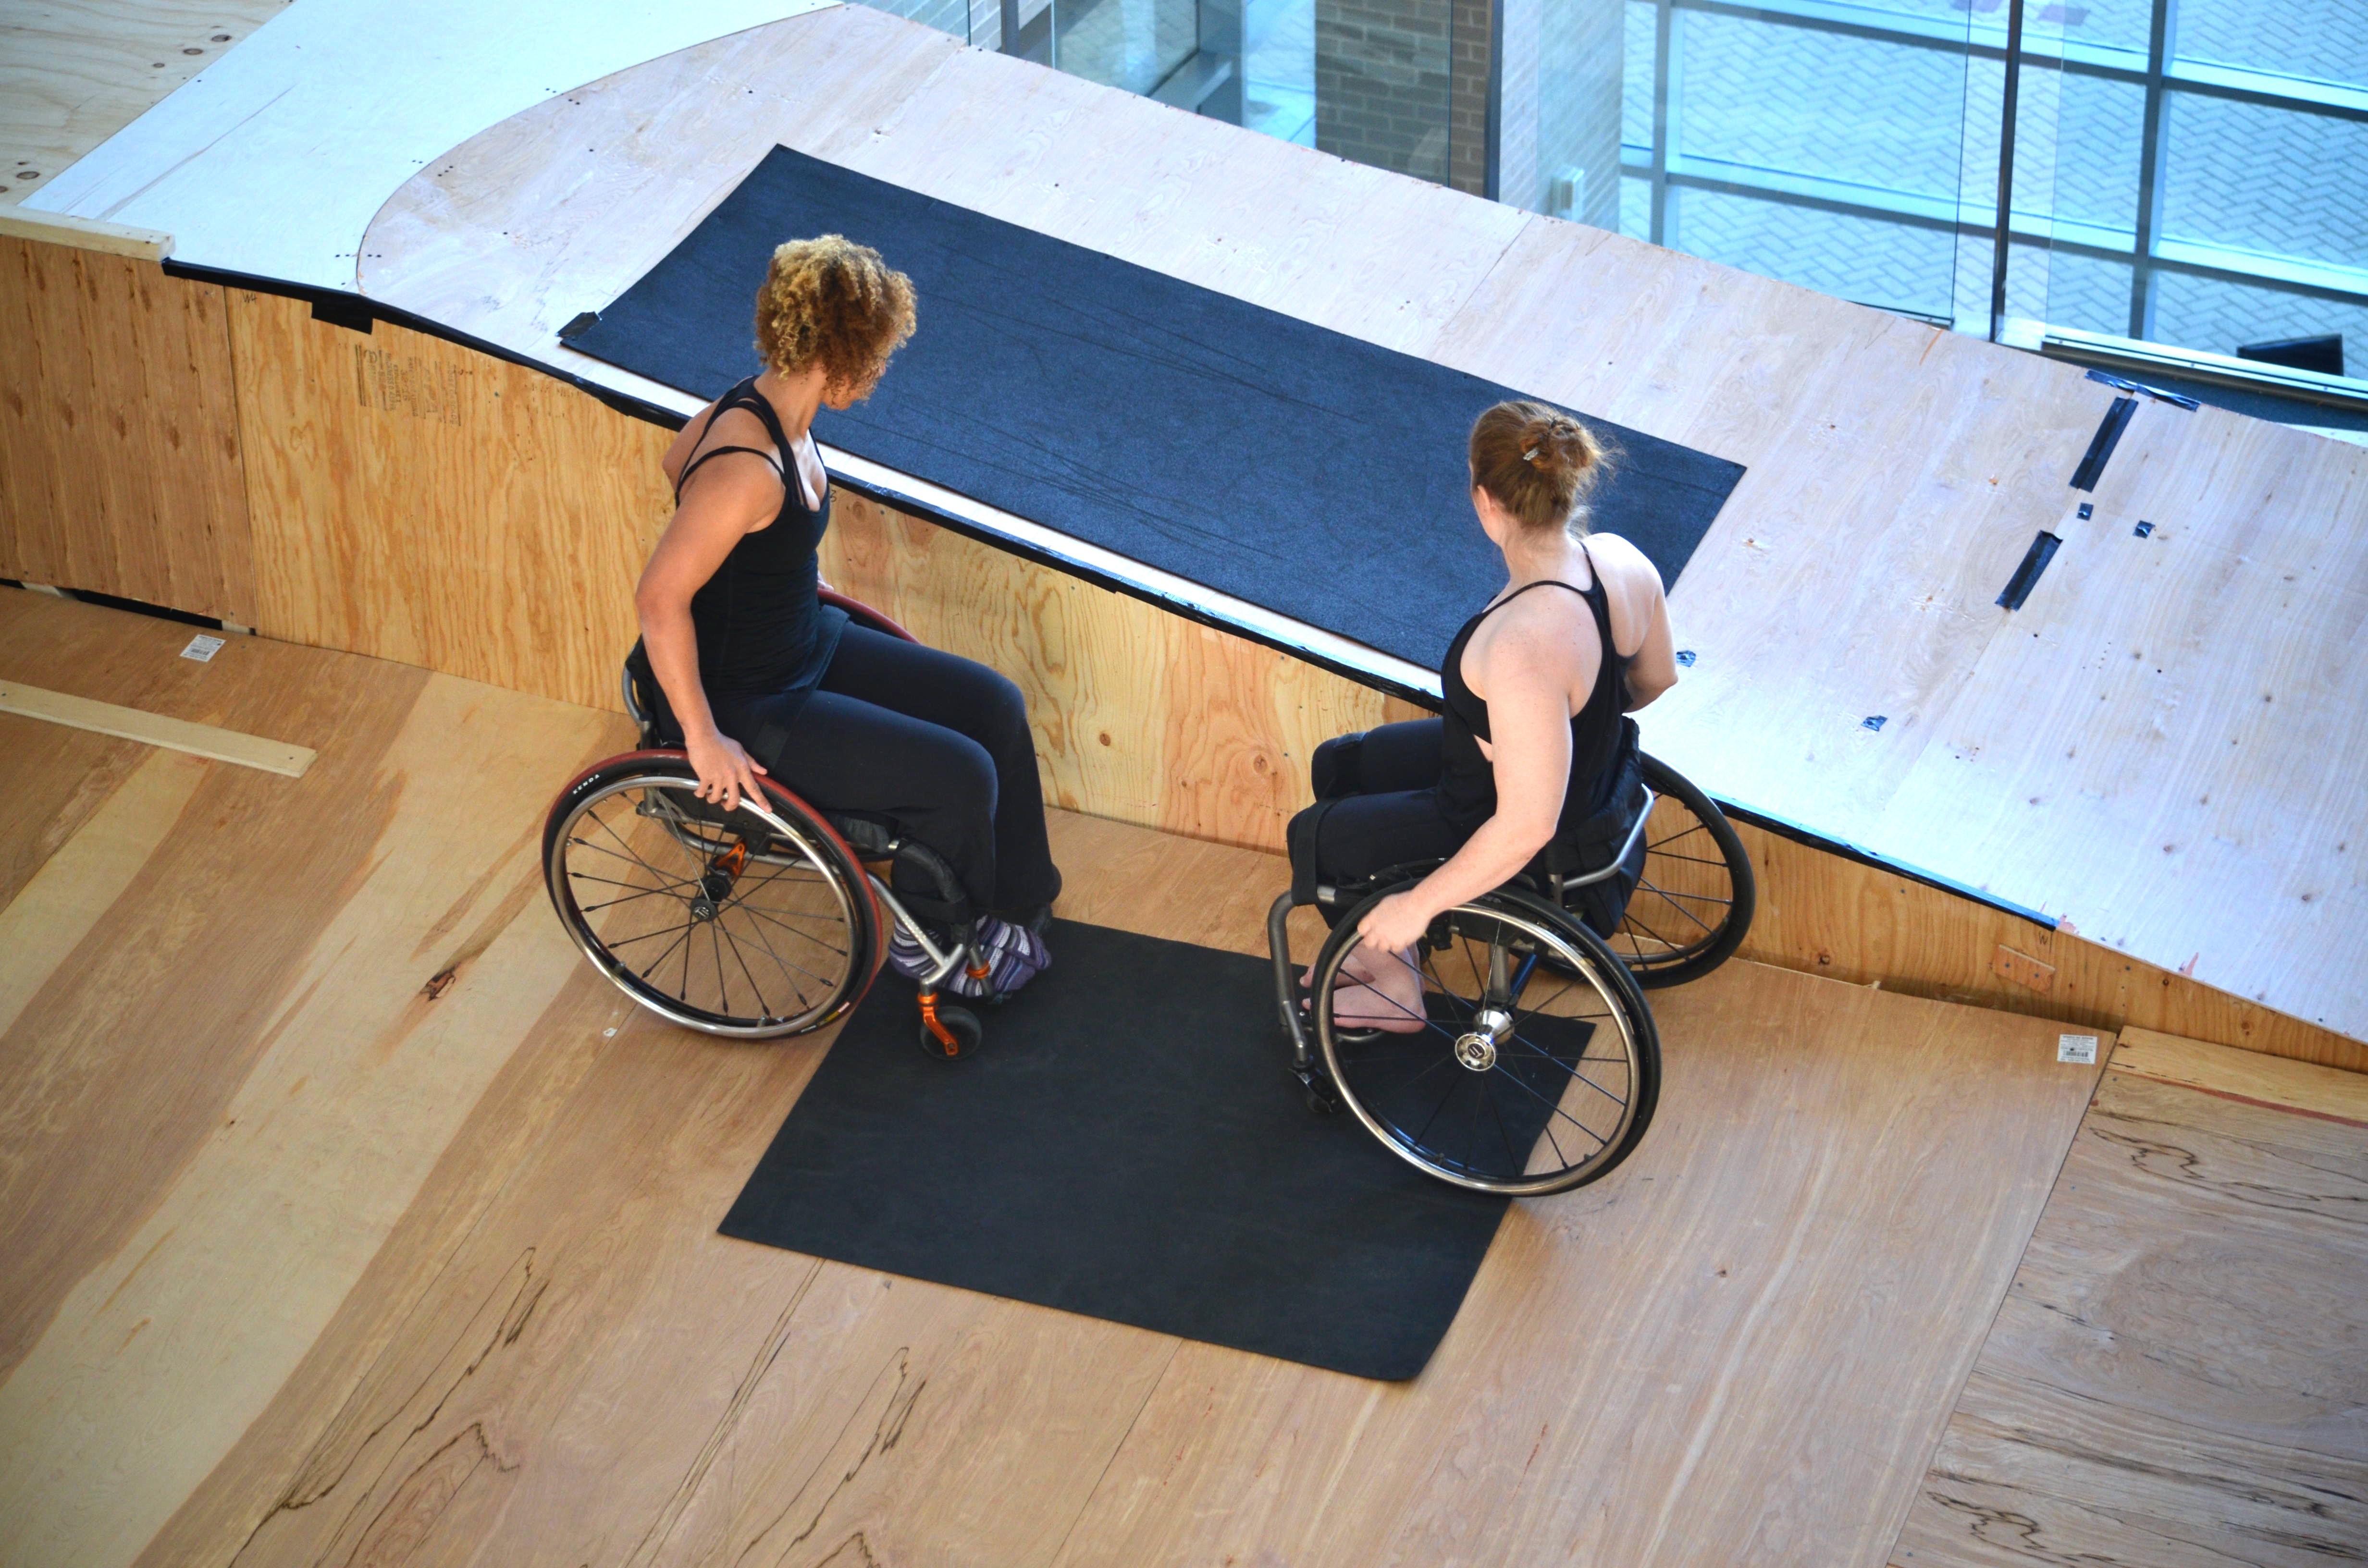 Two women in wheelchairs facing each other, seen from above